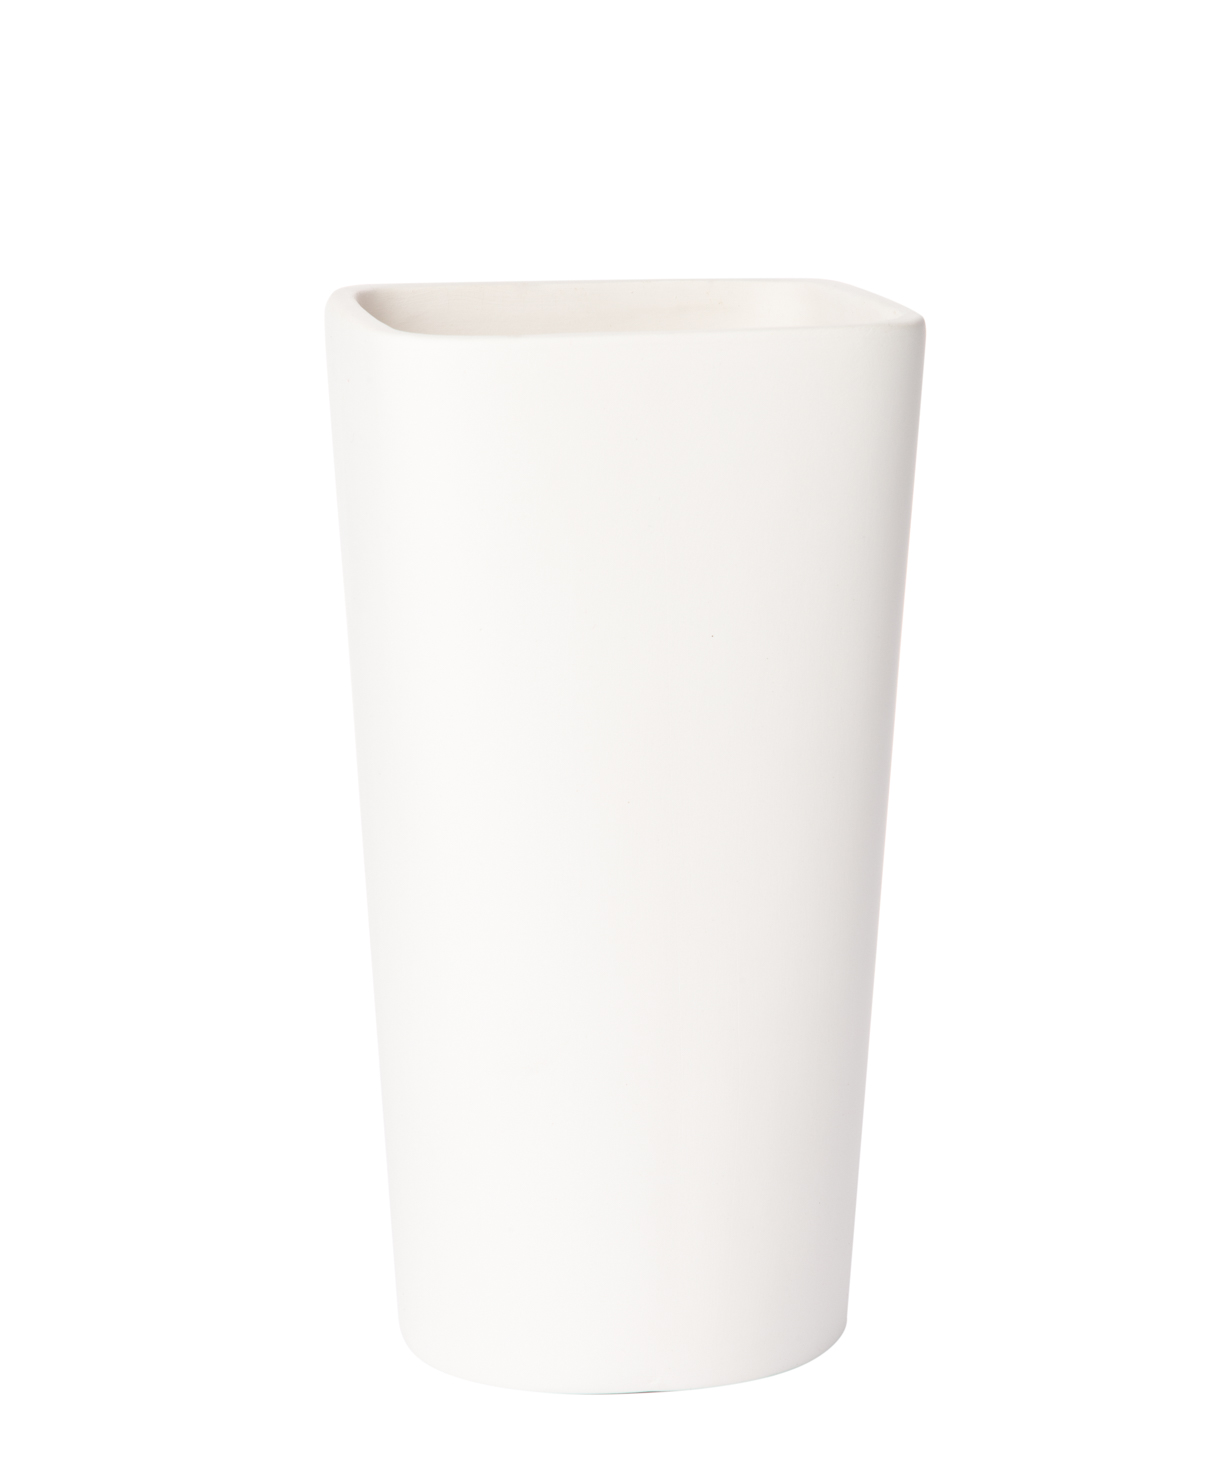 Collection `Yes Republic` art, tall vase